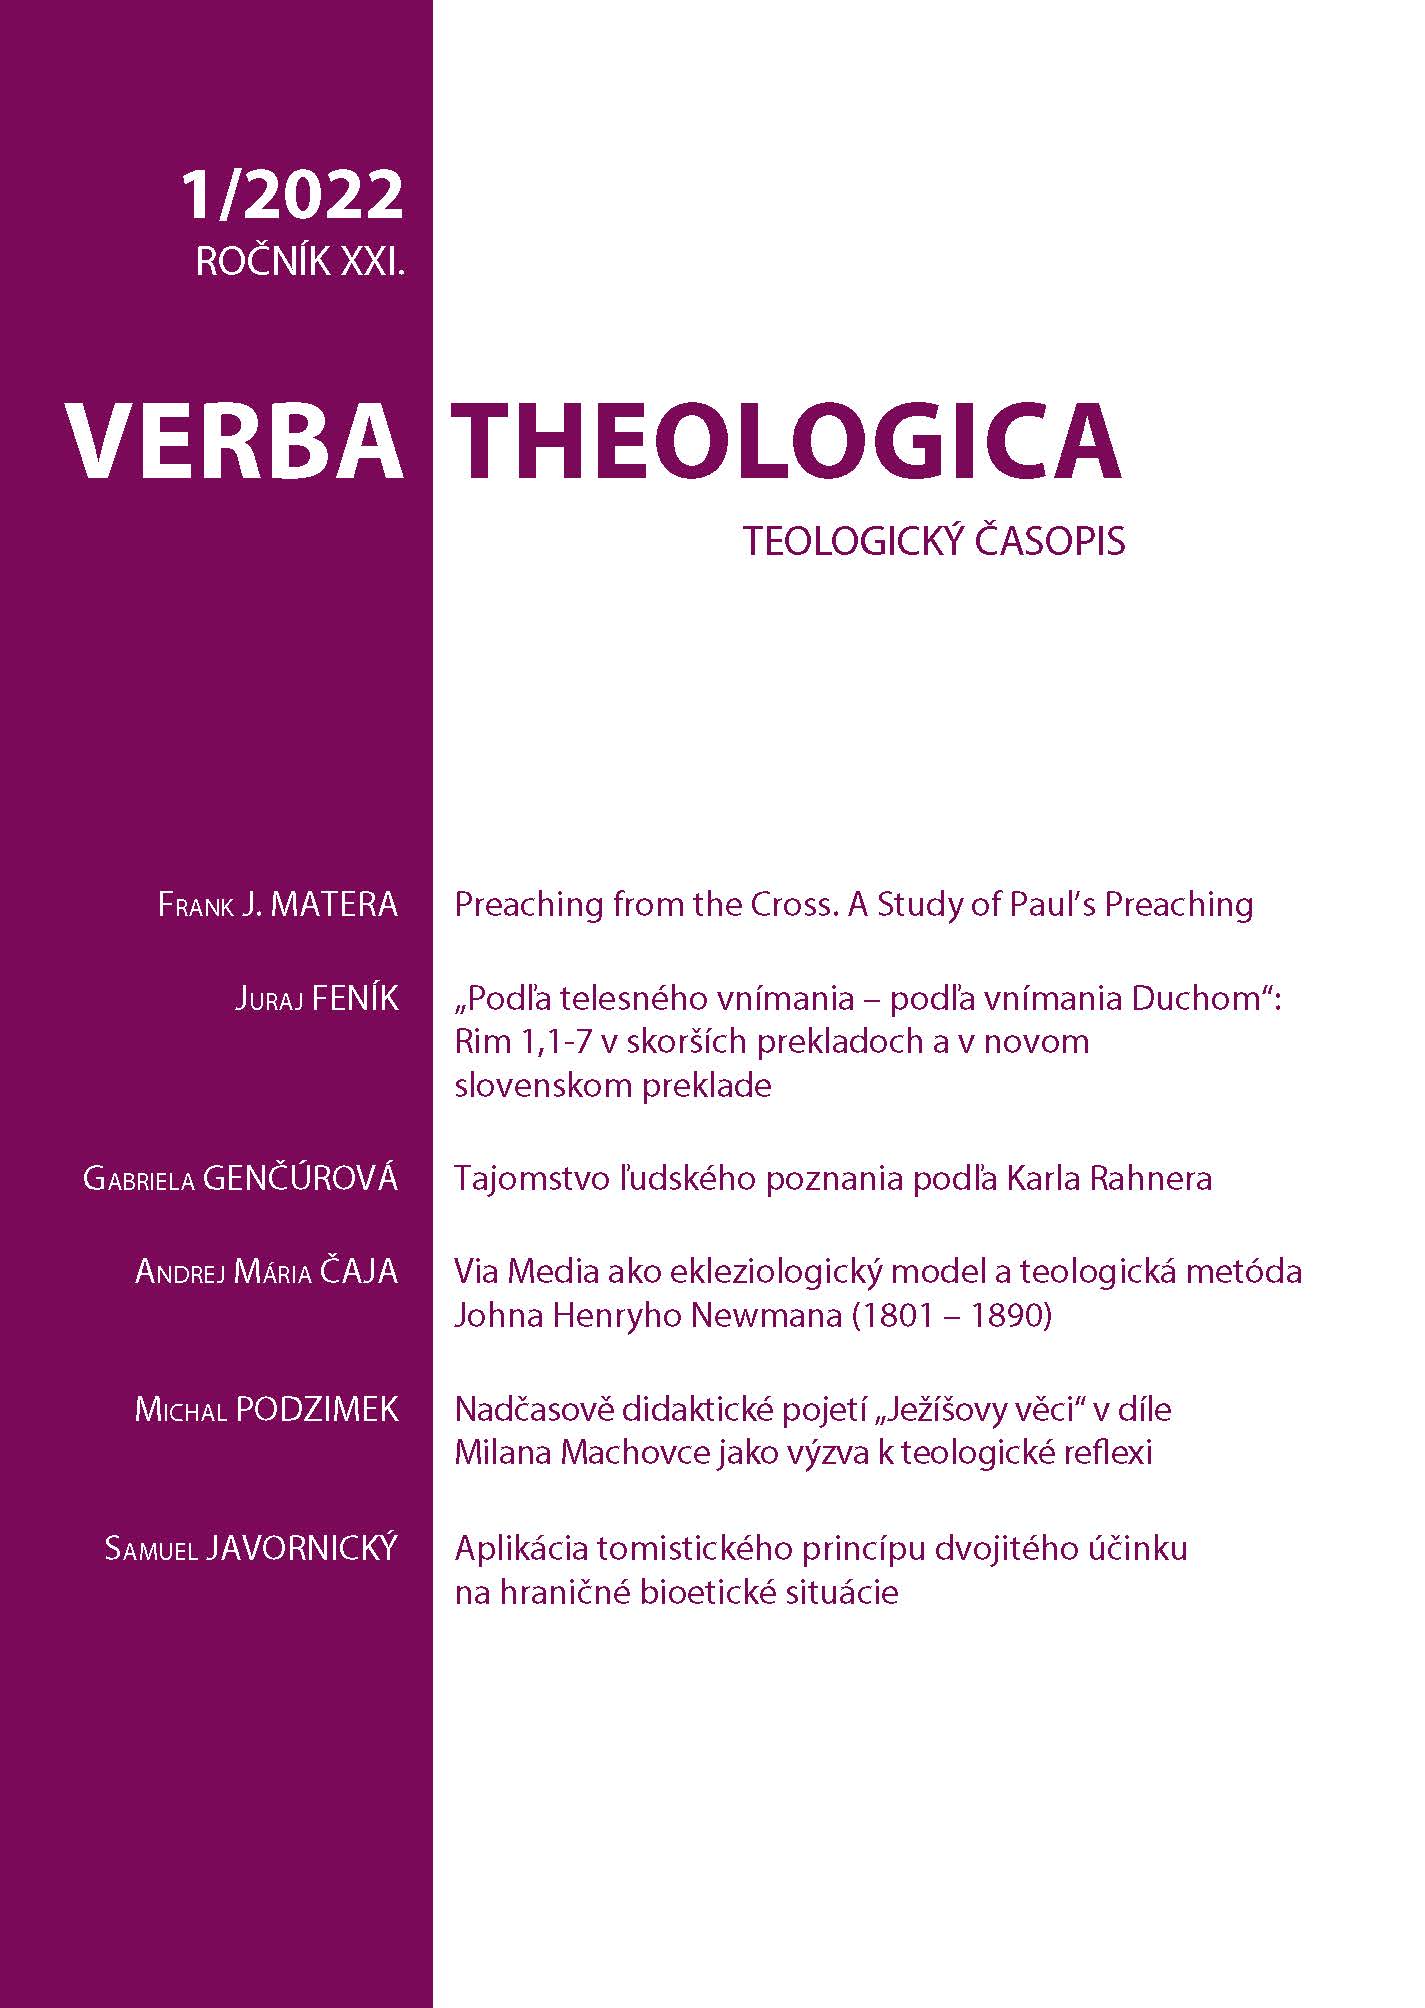 Via Media as an ecclesiological model and theological method according to John Henry Newman (1801-1890) Cover Image